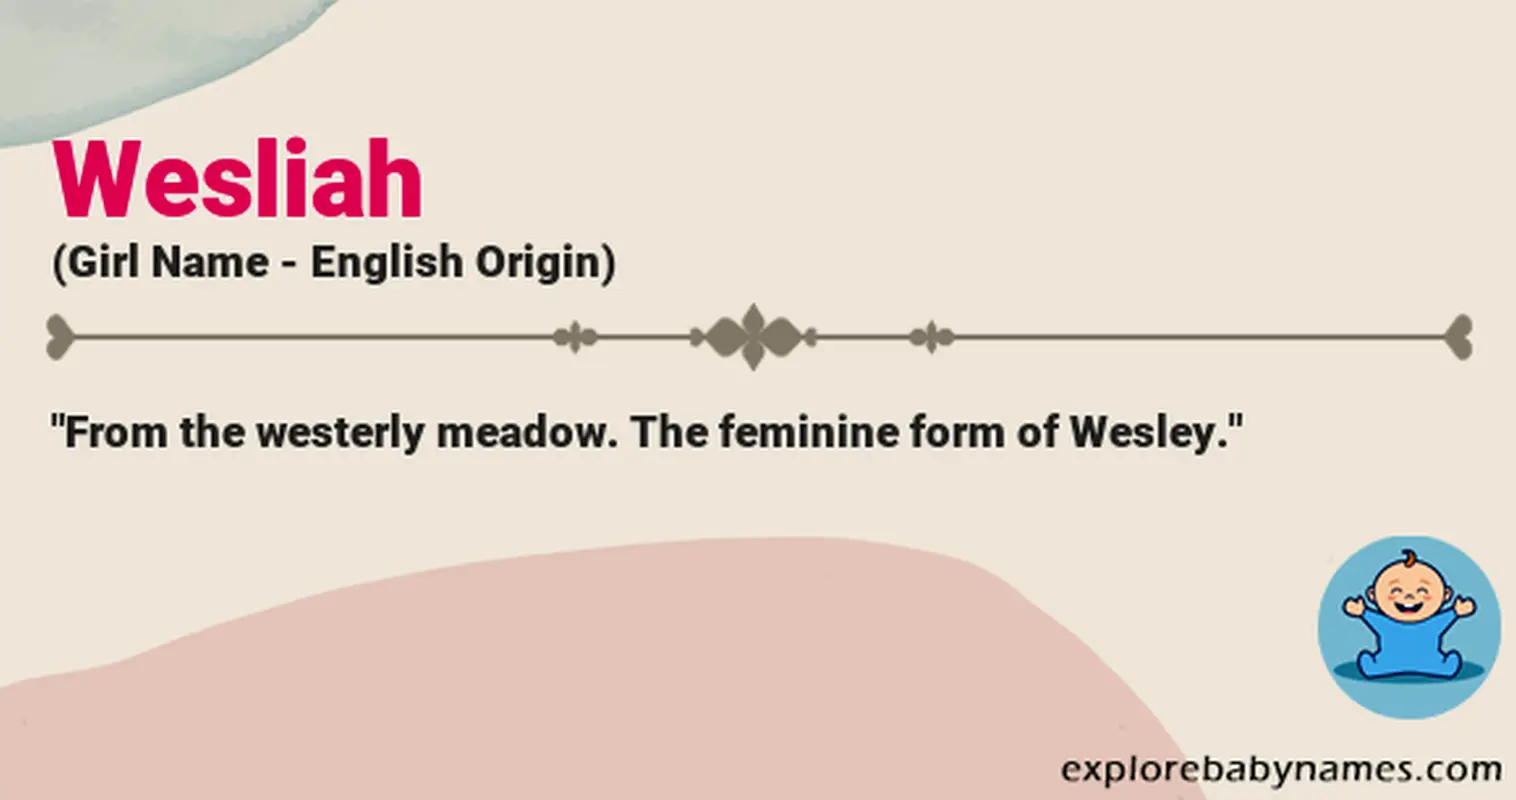 Meaning of Wesliah